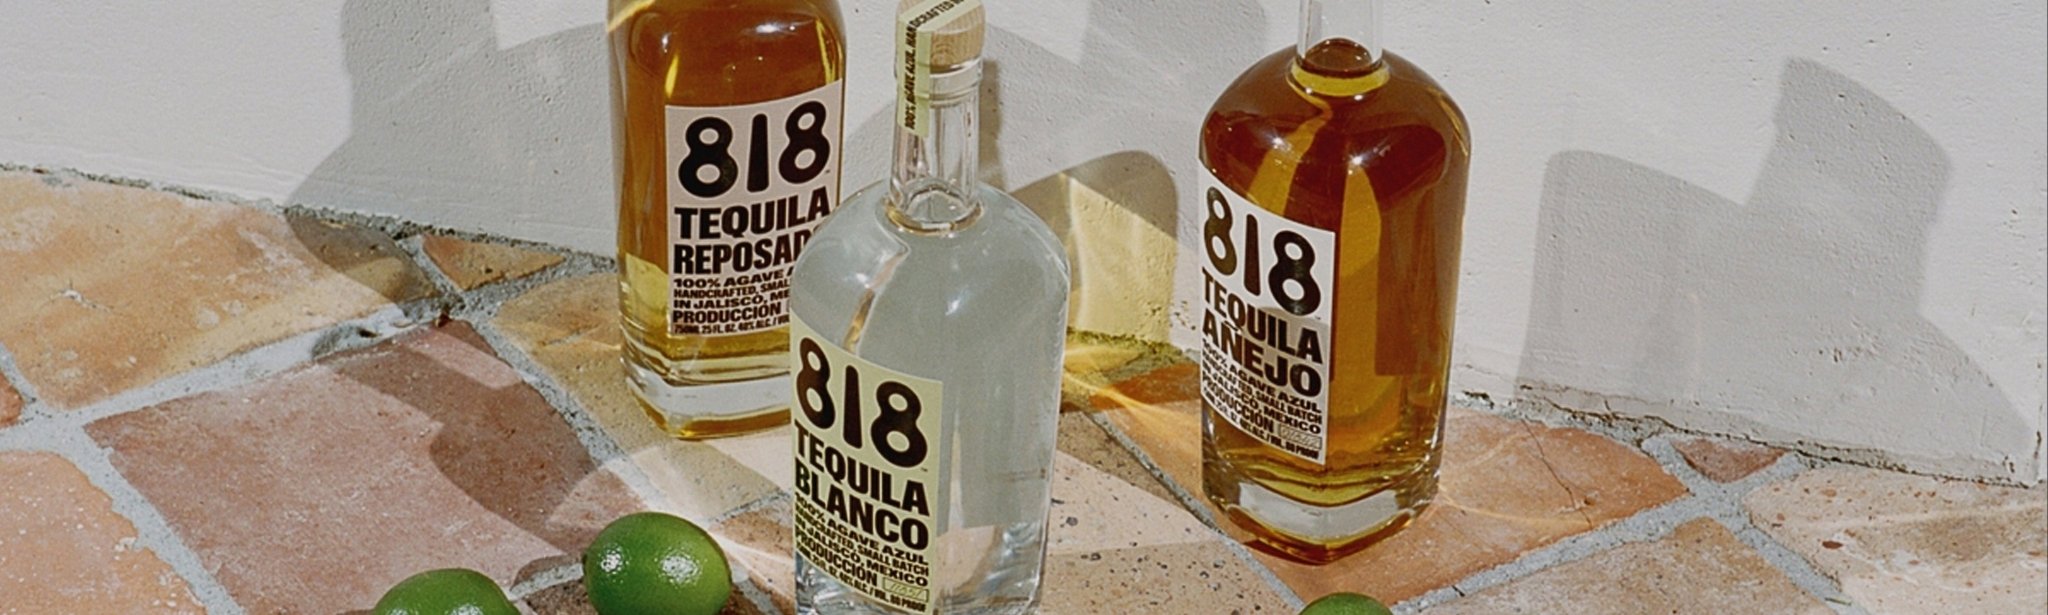 818 Tequila - The Bottle Club